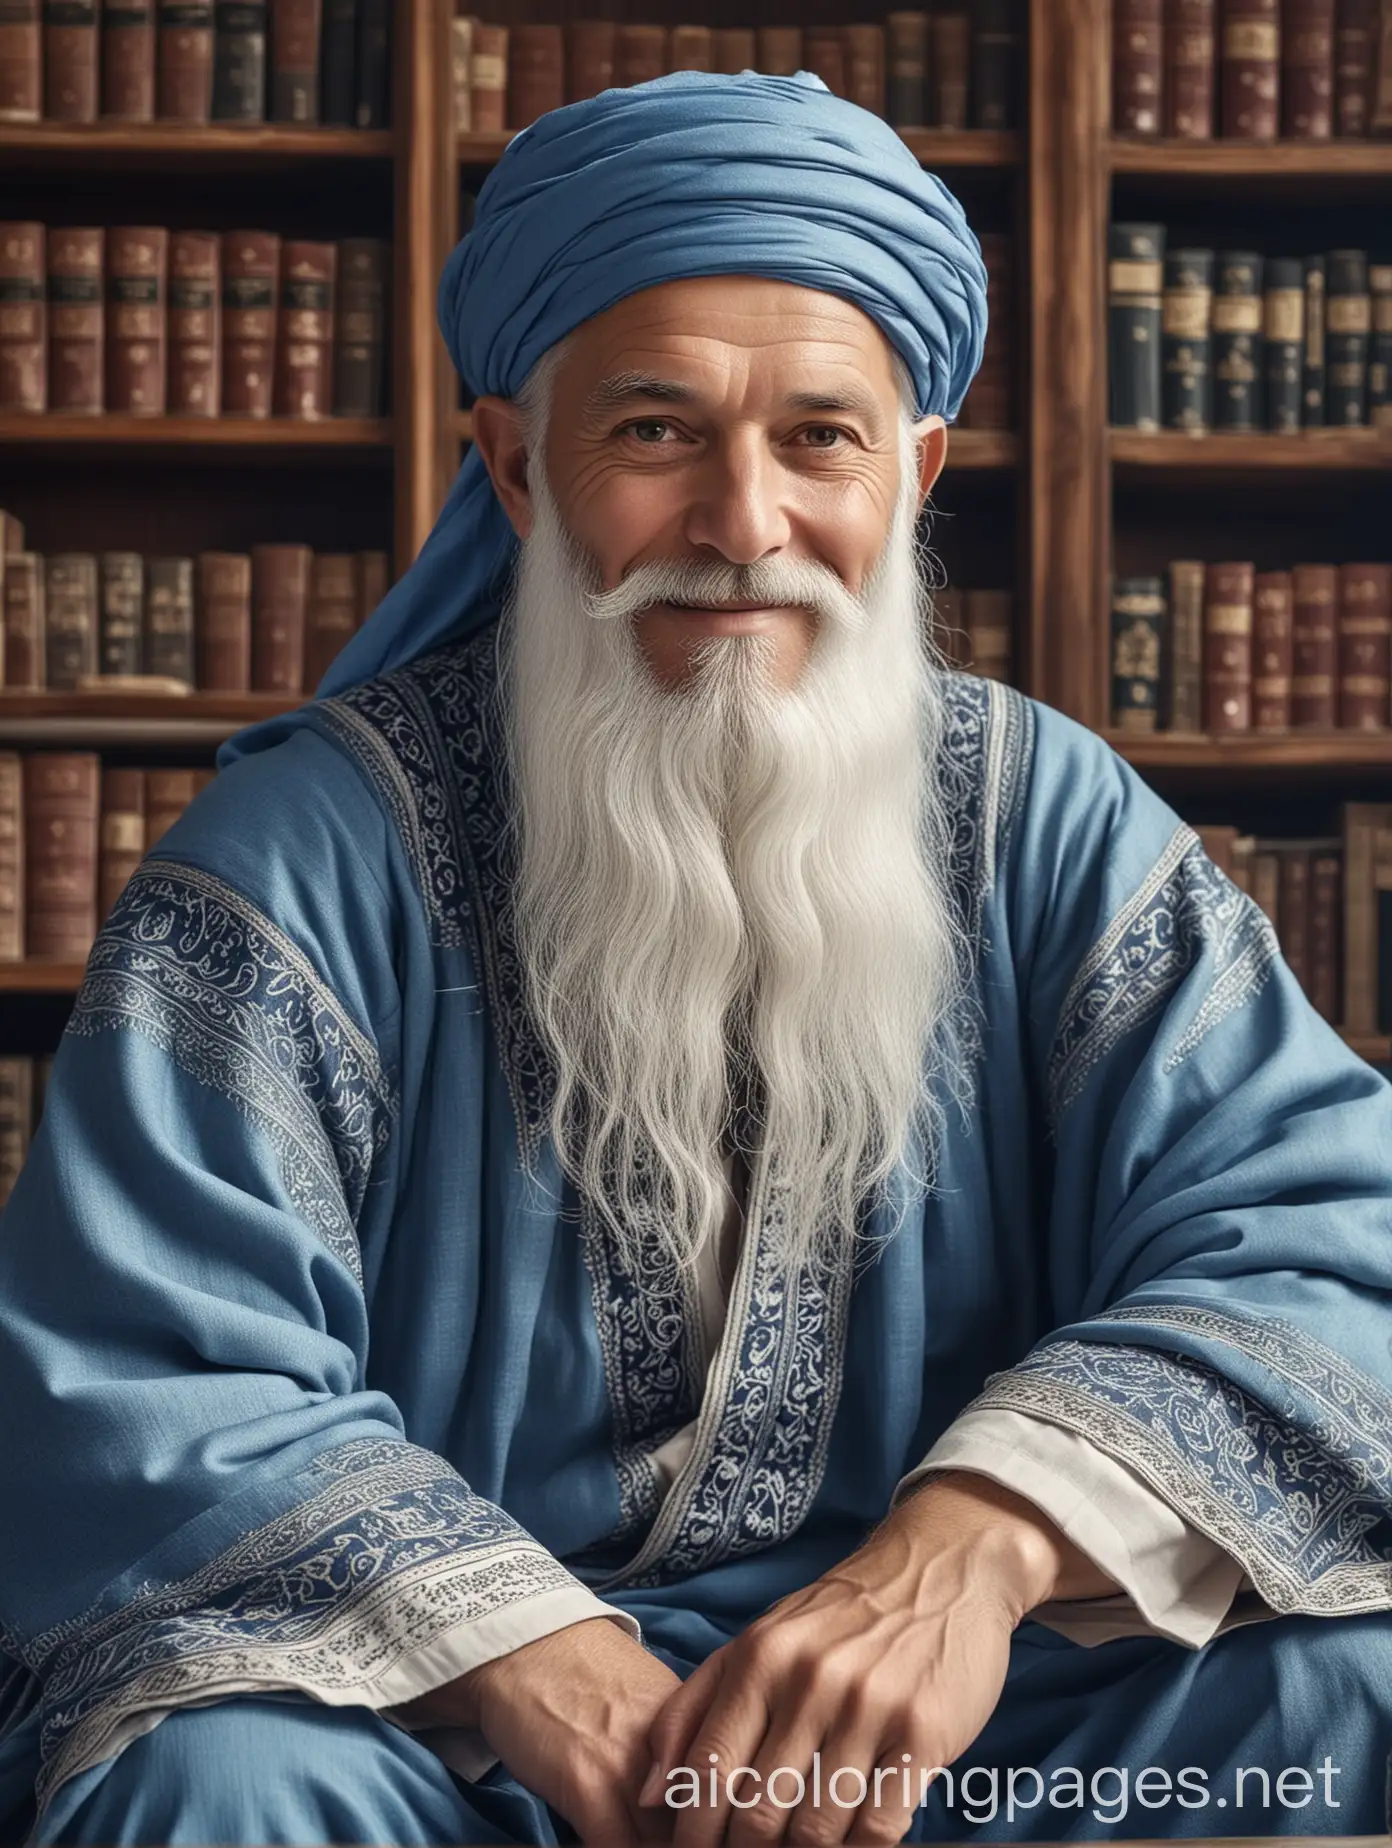 A wise middle-aged man from the Islamic era, with white skin and a long thick white beard, staring at the lens, smiling lightly, sitting in an old library, wearing beautiful blue clothes, very realistic, 4K, vintage, so that the whole body is visible.  , Coloring Page, black and white, line art, white background, Simplicity, Ample White Space. The background of the coloring page is plain white to make it easy for young children to color within the lines. The outlines of all the subjects are easy to distinguish, making it simple for kids to color without too much difficulty